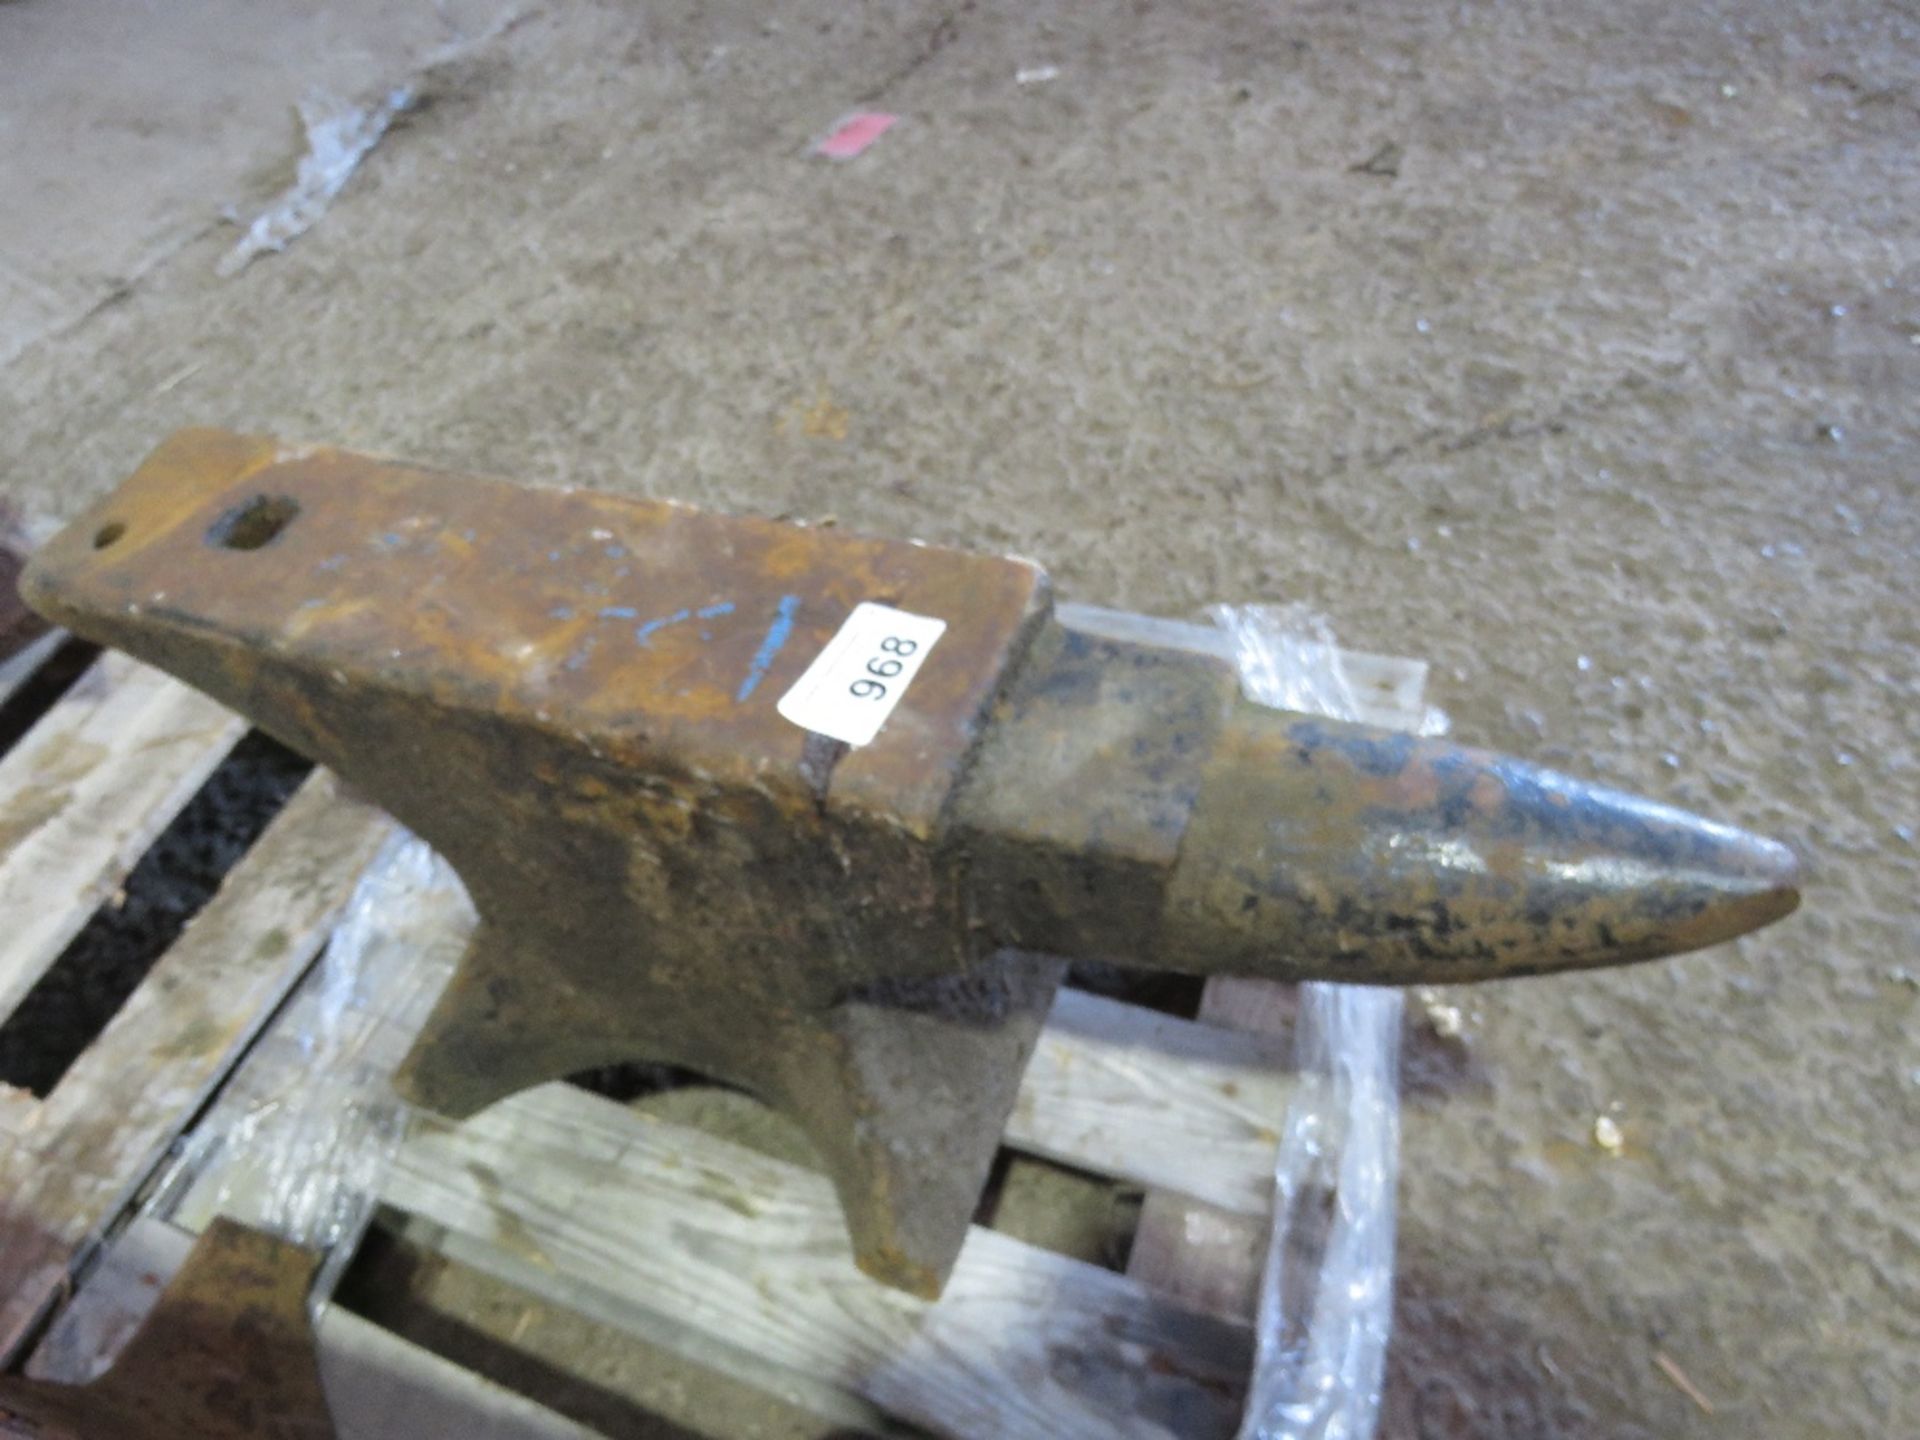 BLACKSMITH'S ANVIL, 75CM OVERALL LENGTH APPROX.